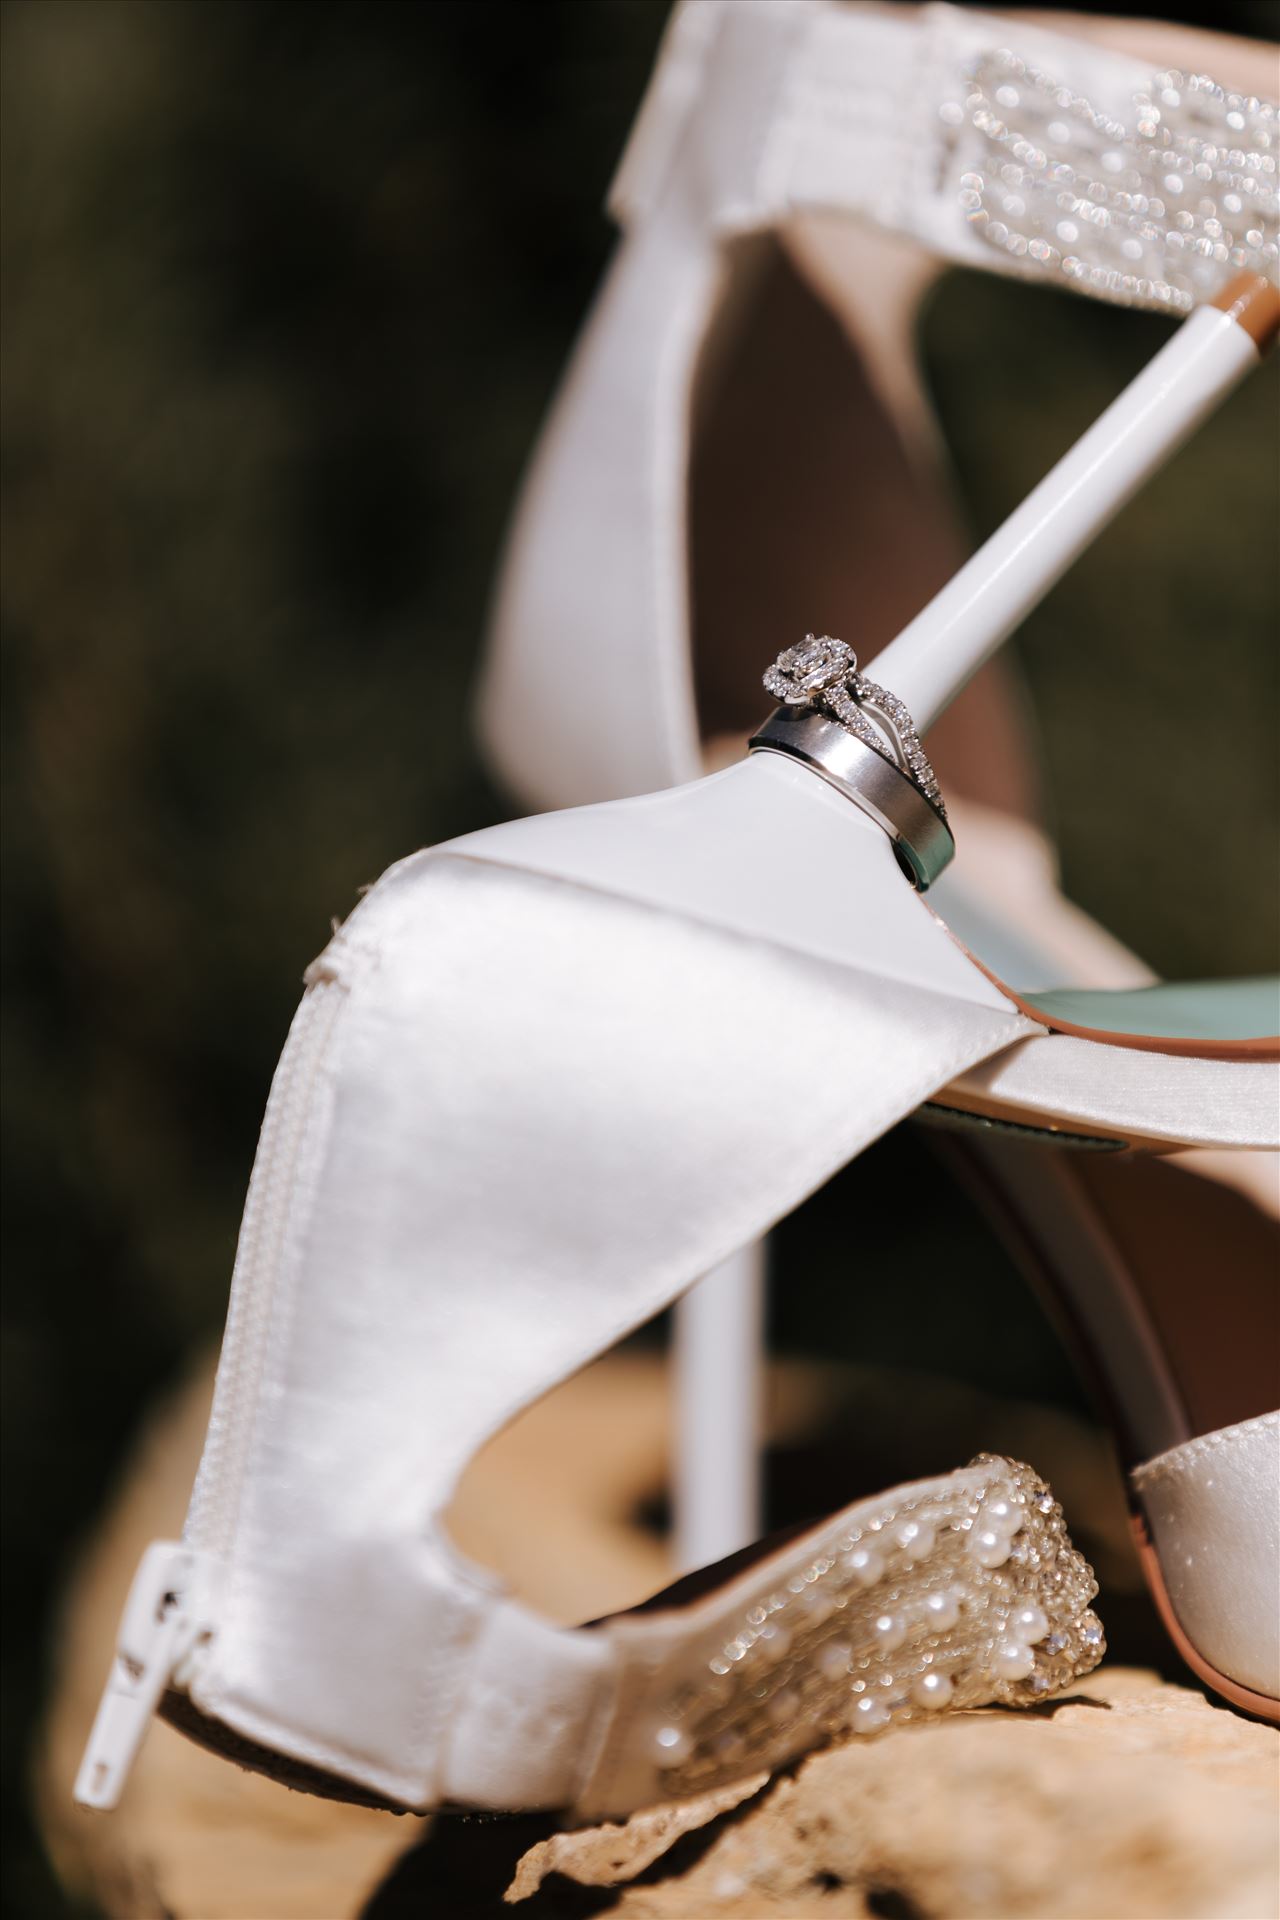 _Y9A6433.JPGTooth and Nail Winery elegant and formal wedding in Paso Robles California wine country by Mirror's Edge Photography, San Luis Obispo County Wedding Photographer. Bridal shoes and wedding rings